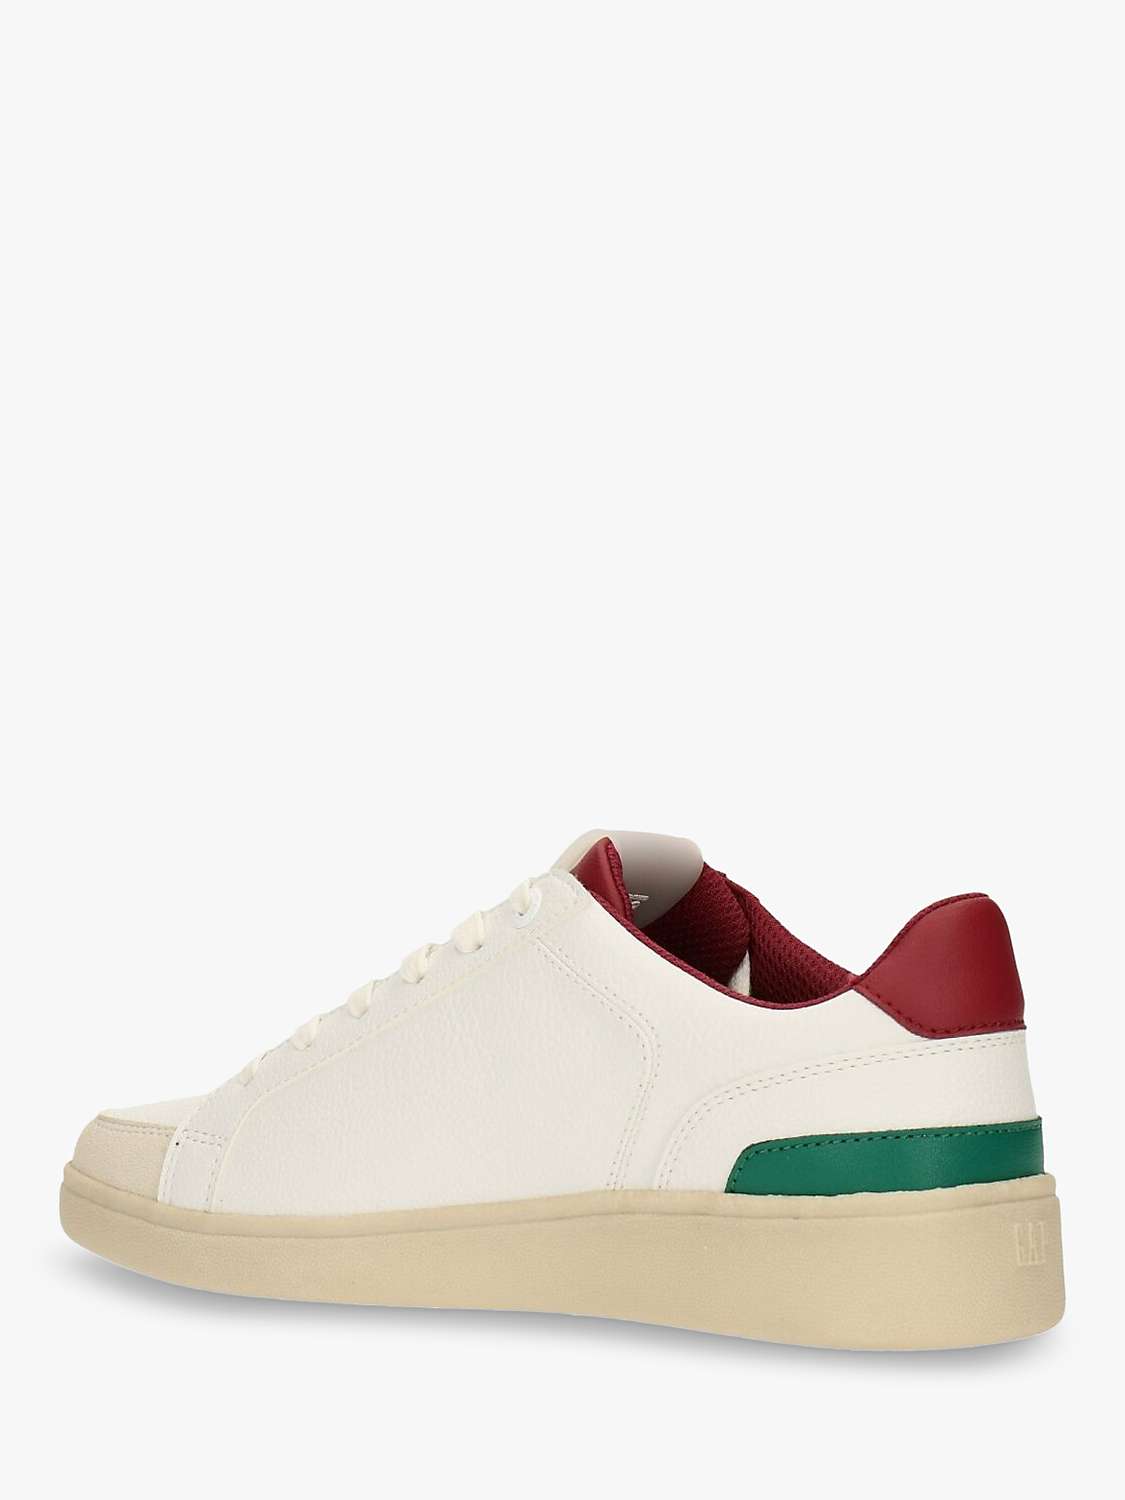 Buy Gap Kids' Seattle II Lace Up Trainers Online at johnlewis.com